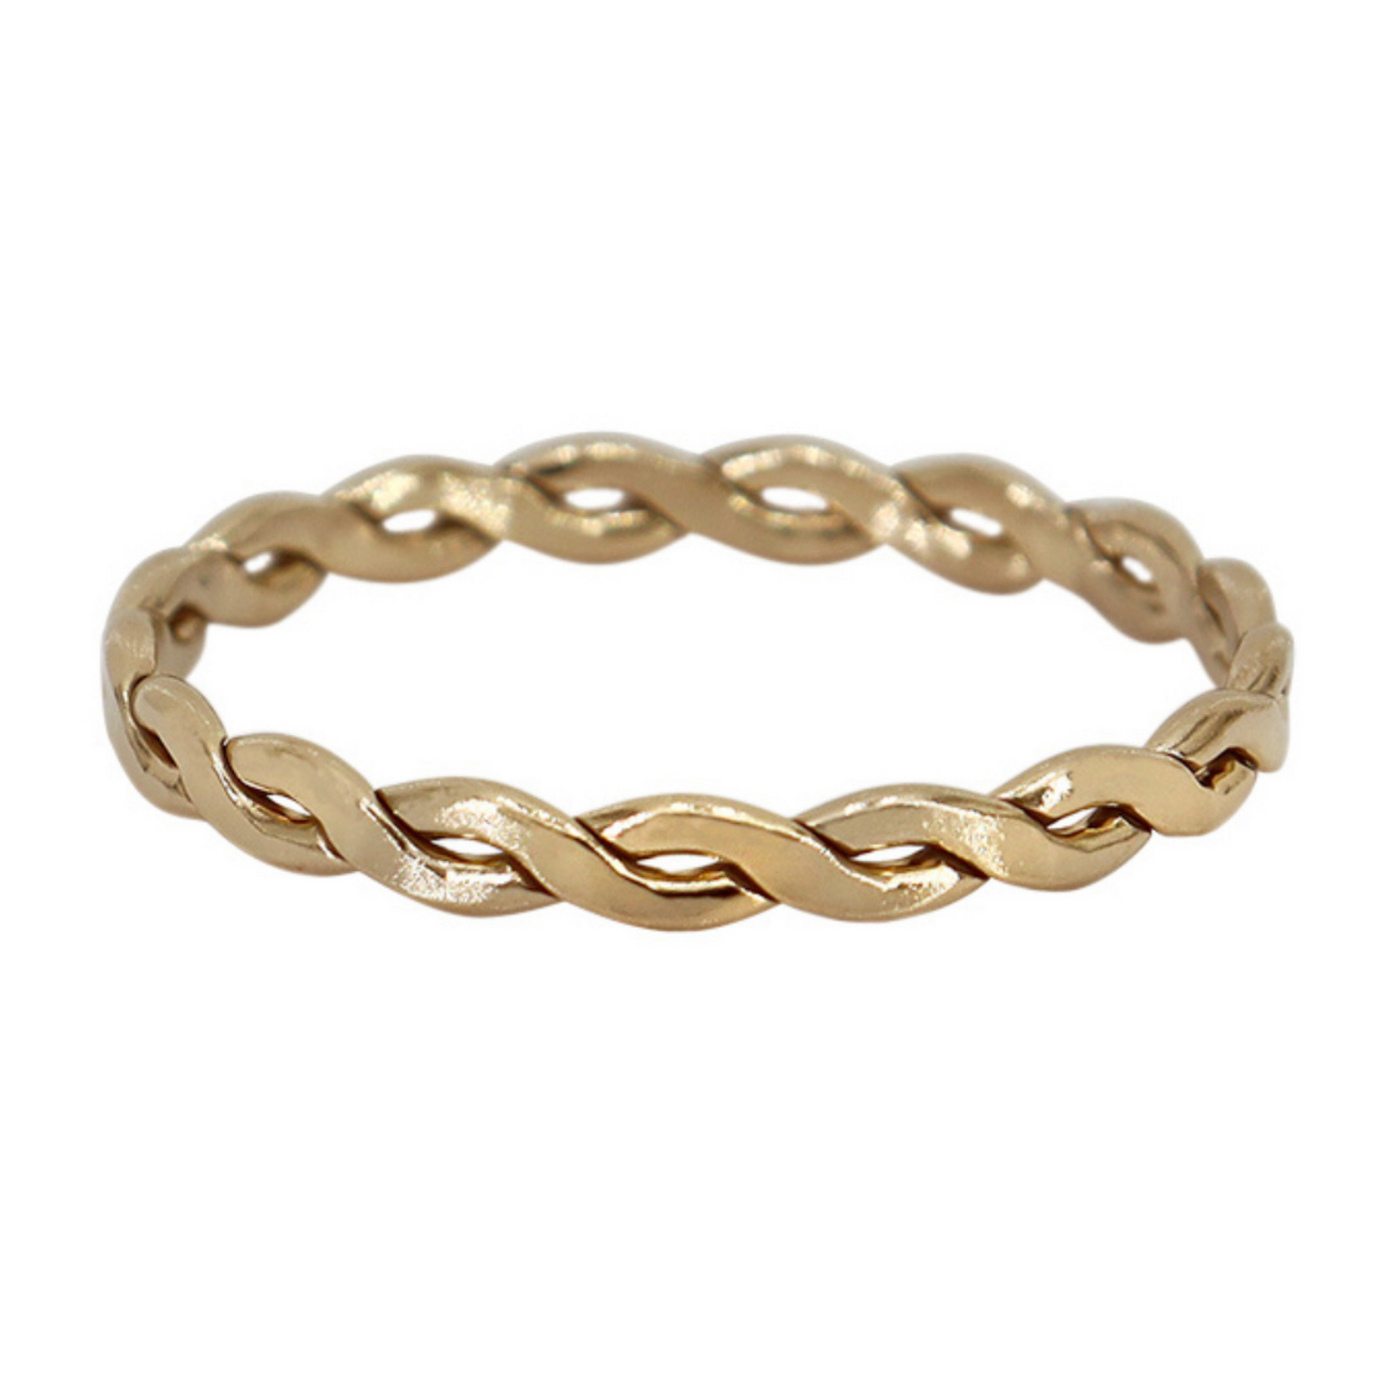 Highly polished 14K gold filled double braided women's stacking ring  on white background